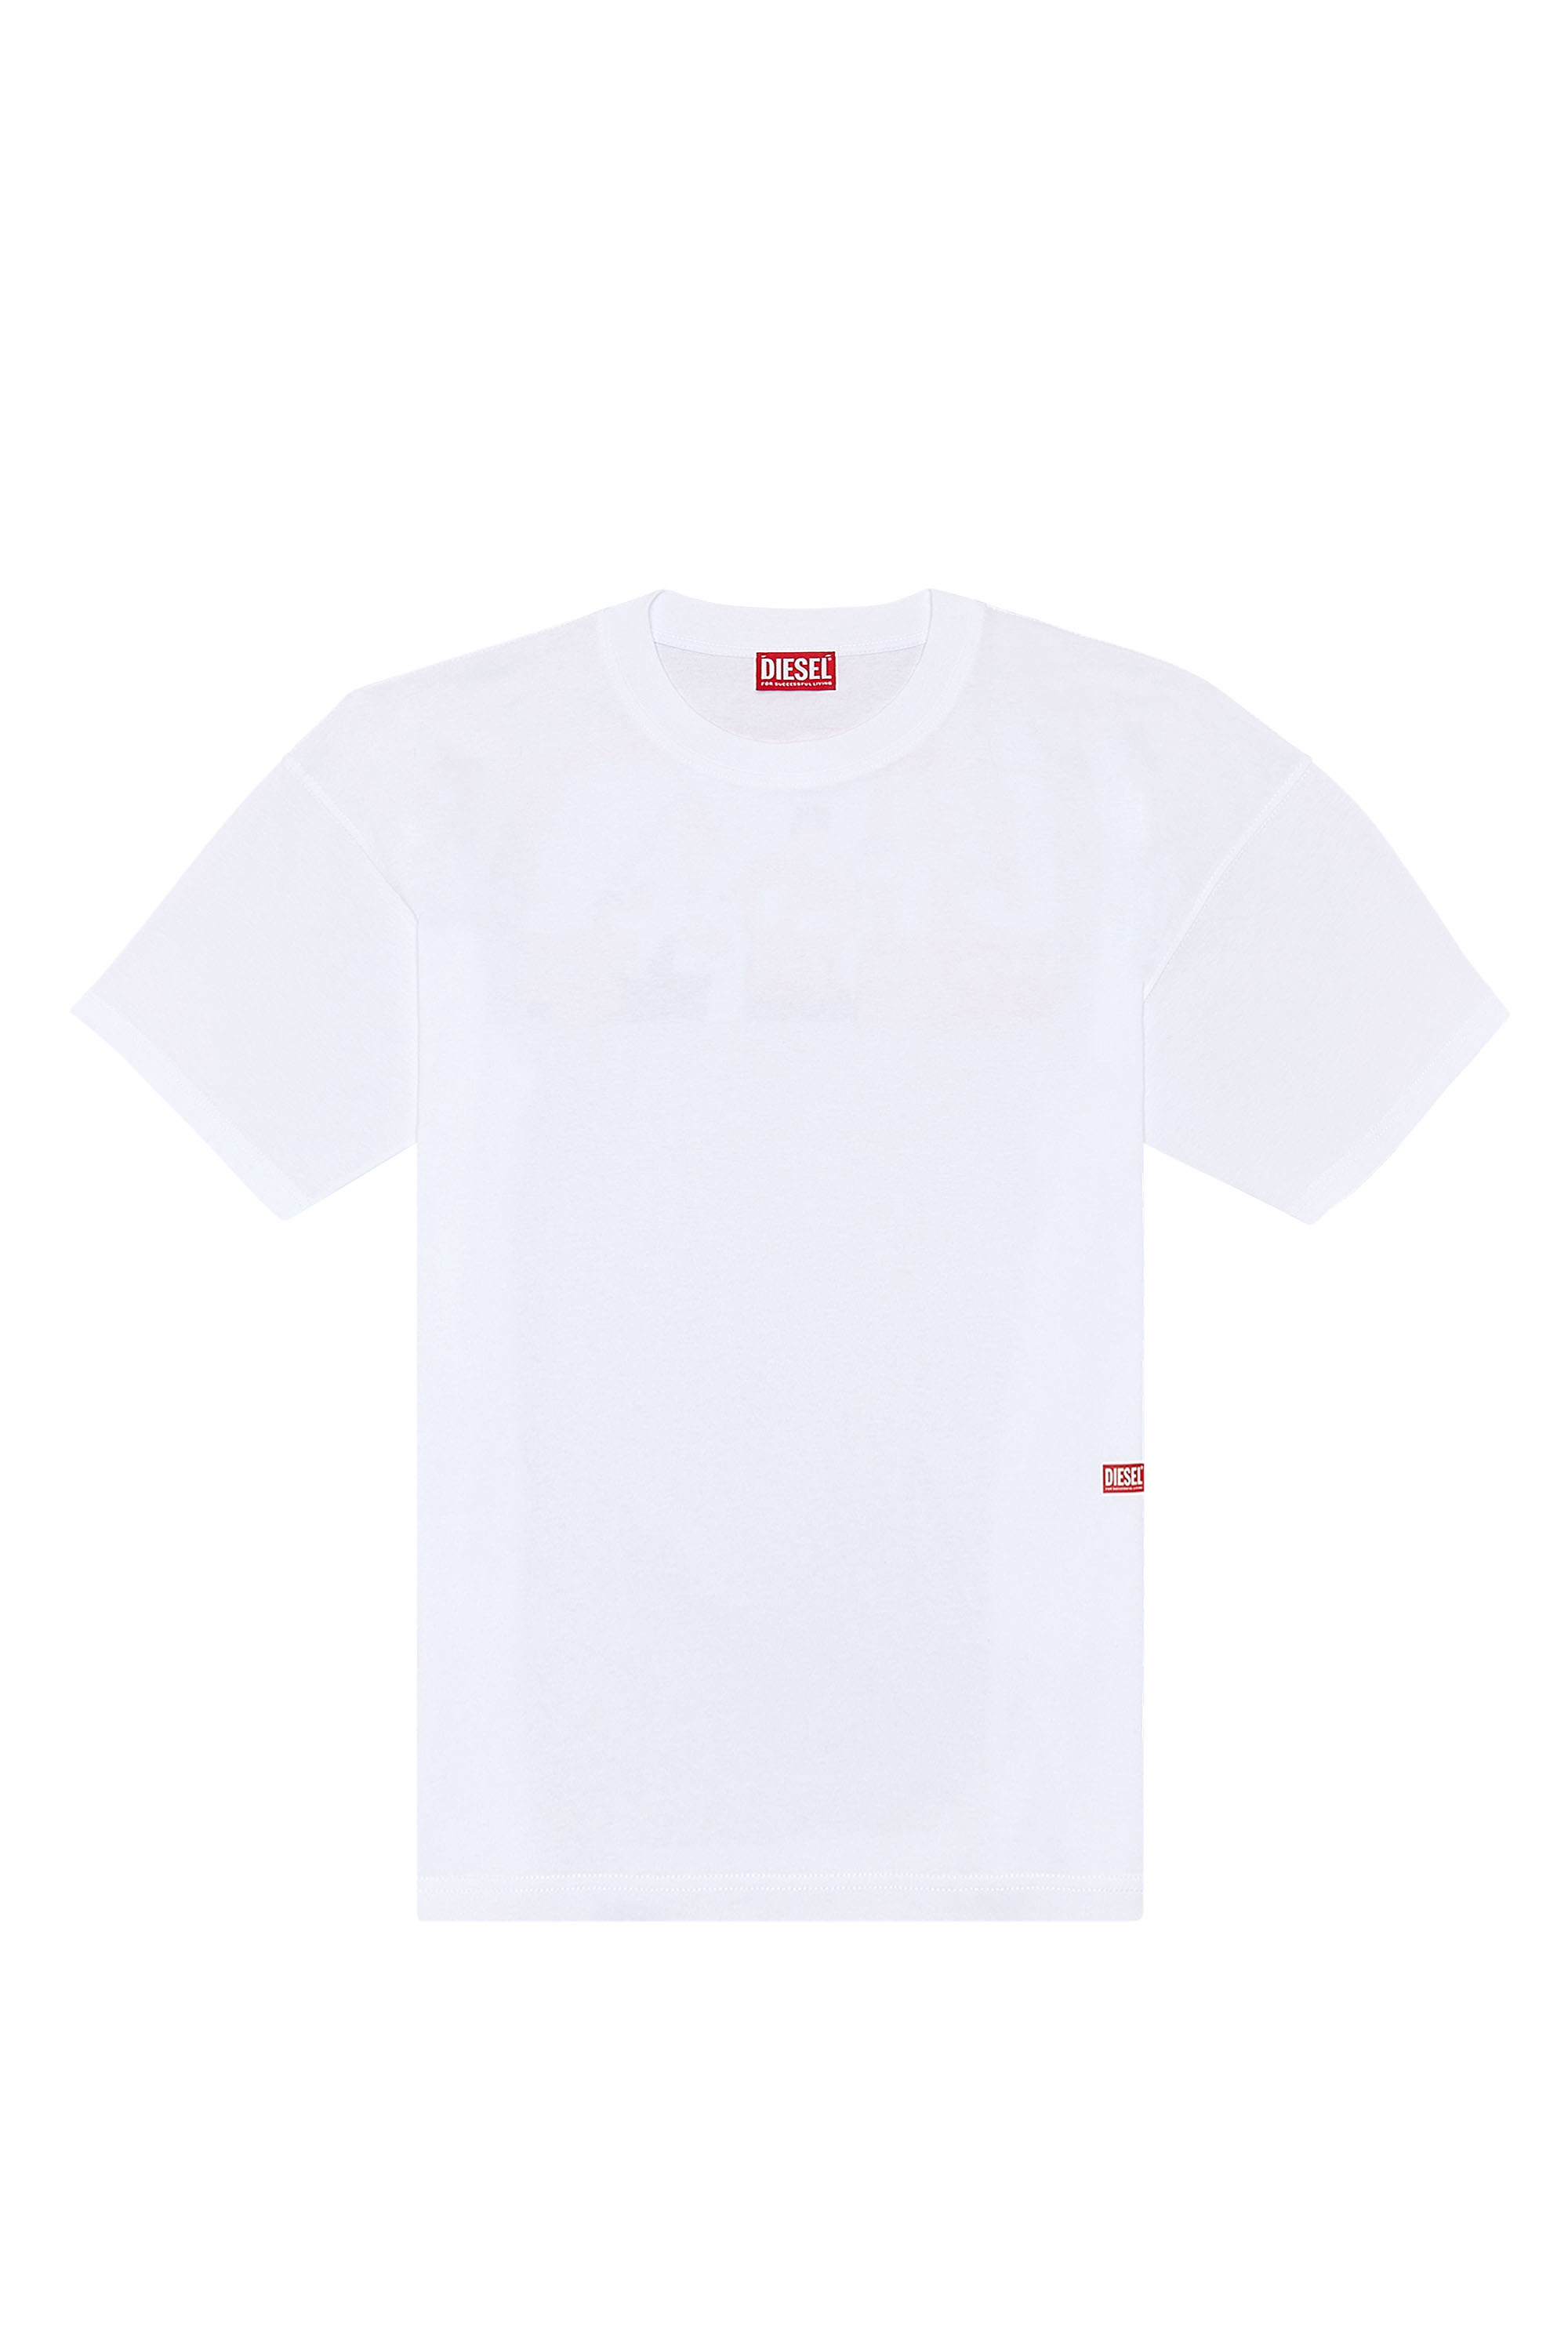 Diesel - T-BOXT-N11, Man T-shirt with photo print logo in White - Image 3